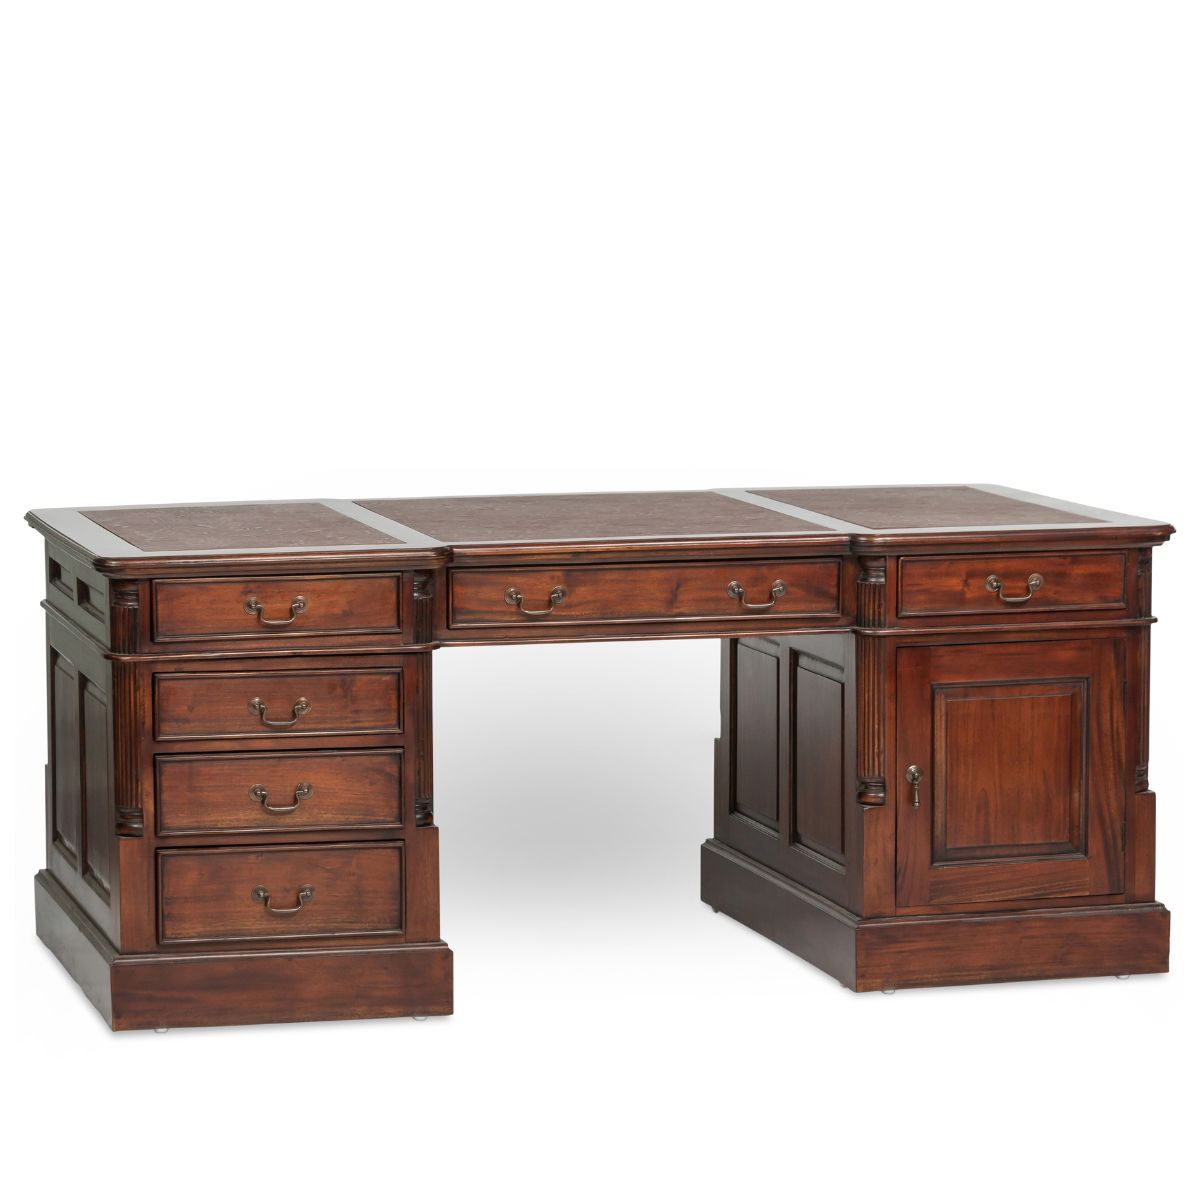 French Partner Desk with Drawers on Both Sides